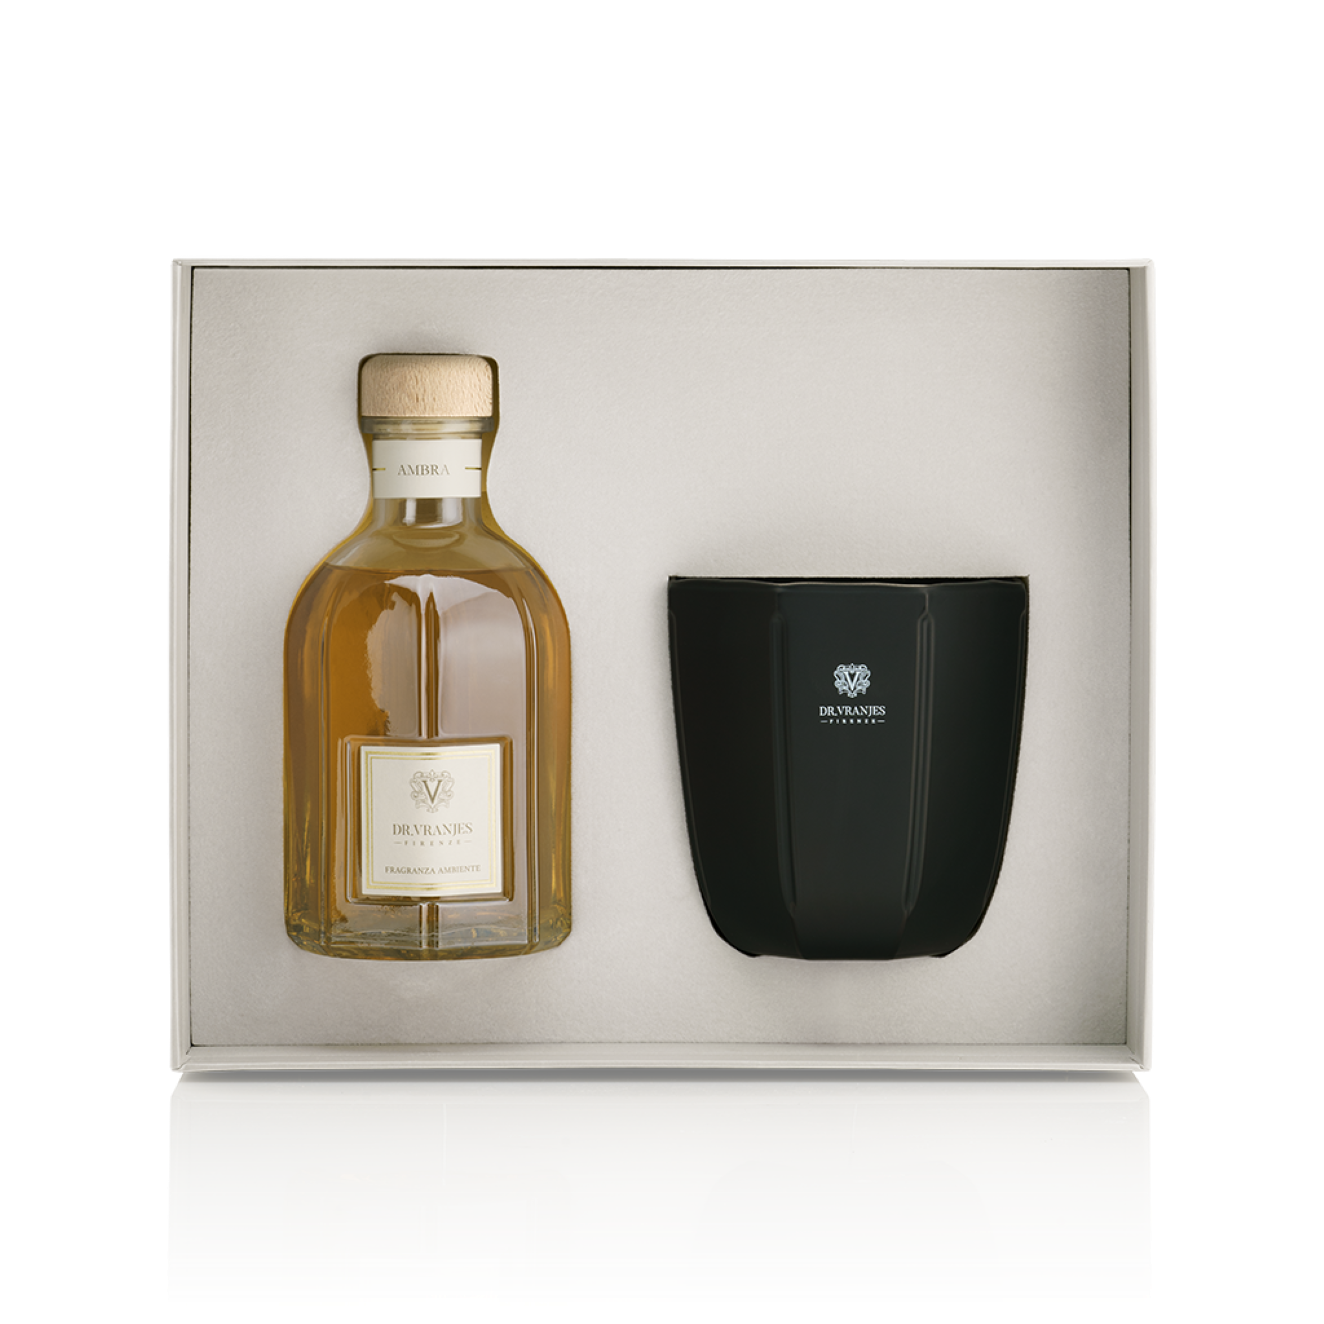 Dr. Vranjes Diffuser and Candle